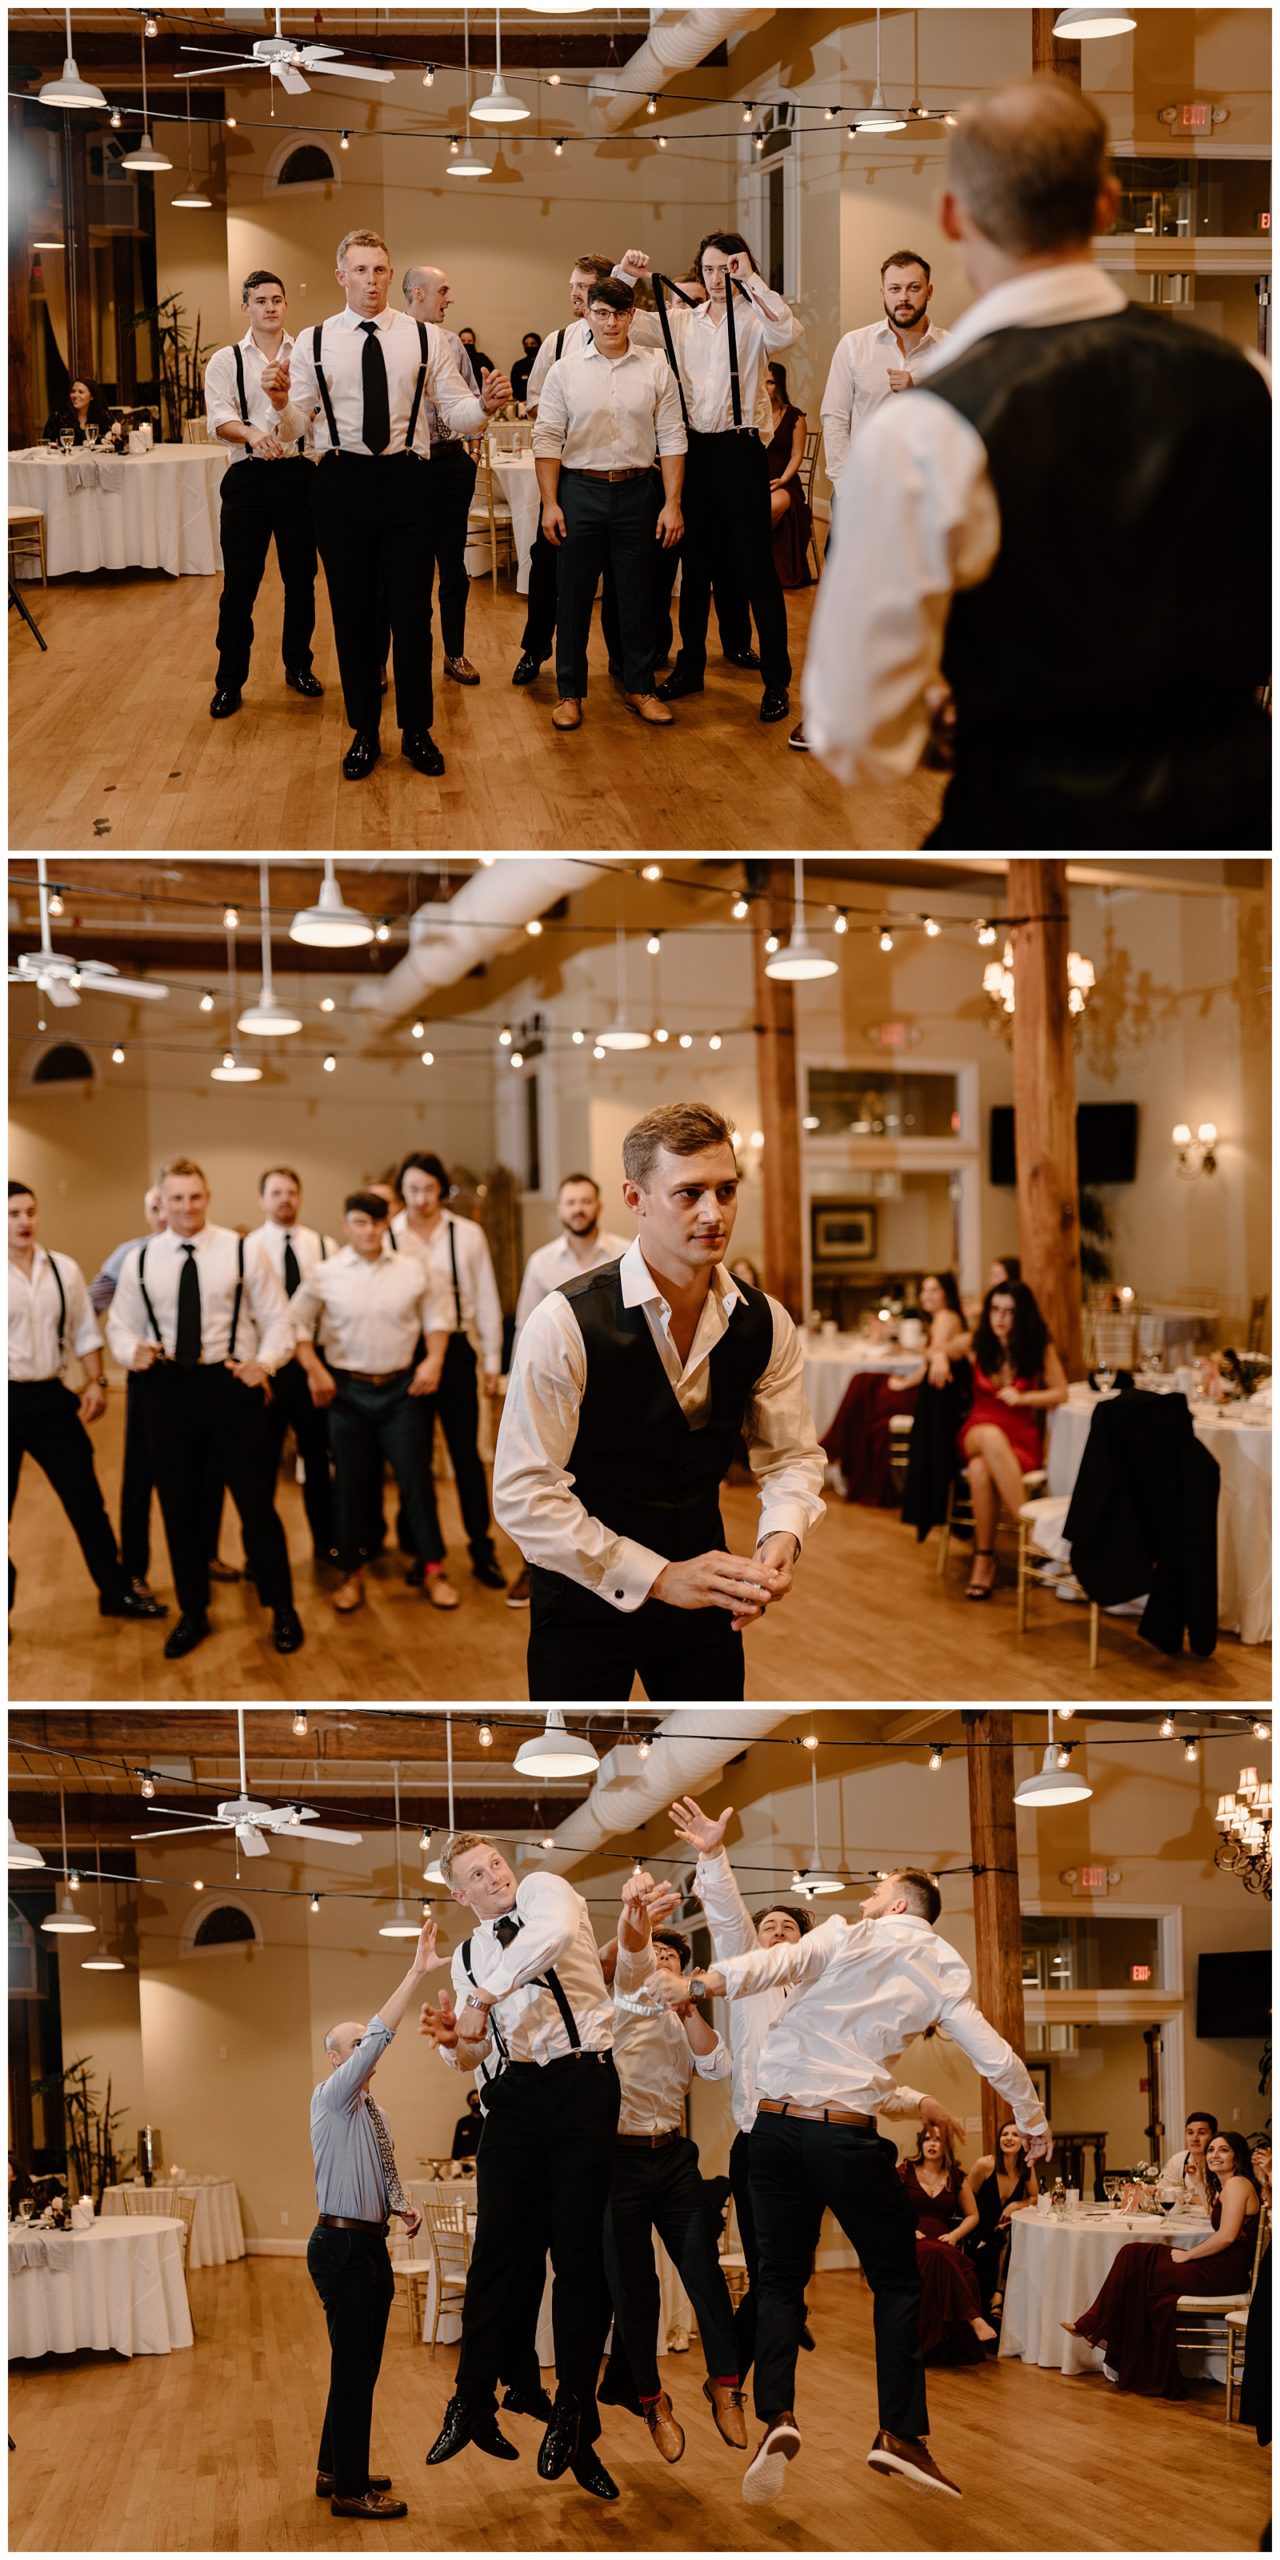 Bridal bouquet toss at fall wedding reception in Greensboro NC